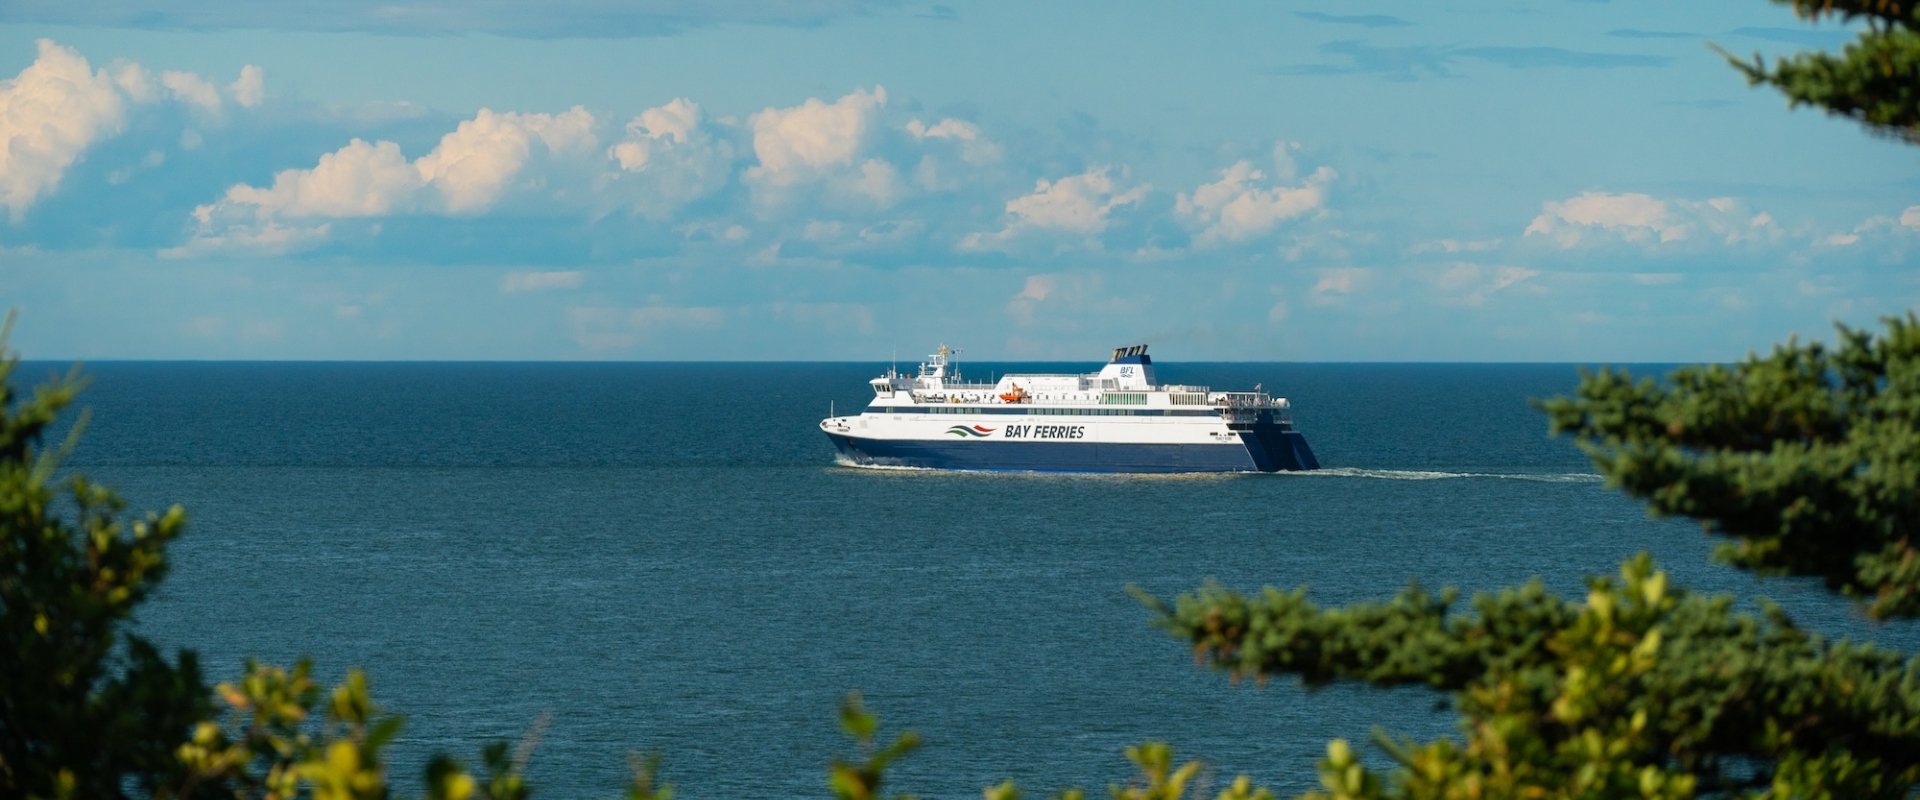 A large ferry sailing in the ocean from a distance on a sunny day, blue skies with a few clouds.